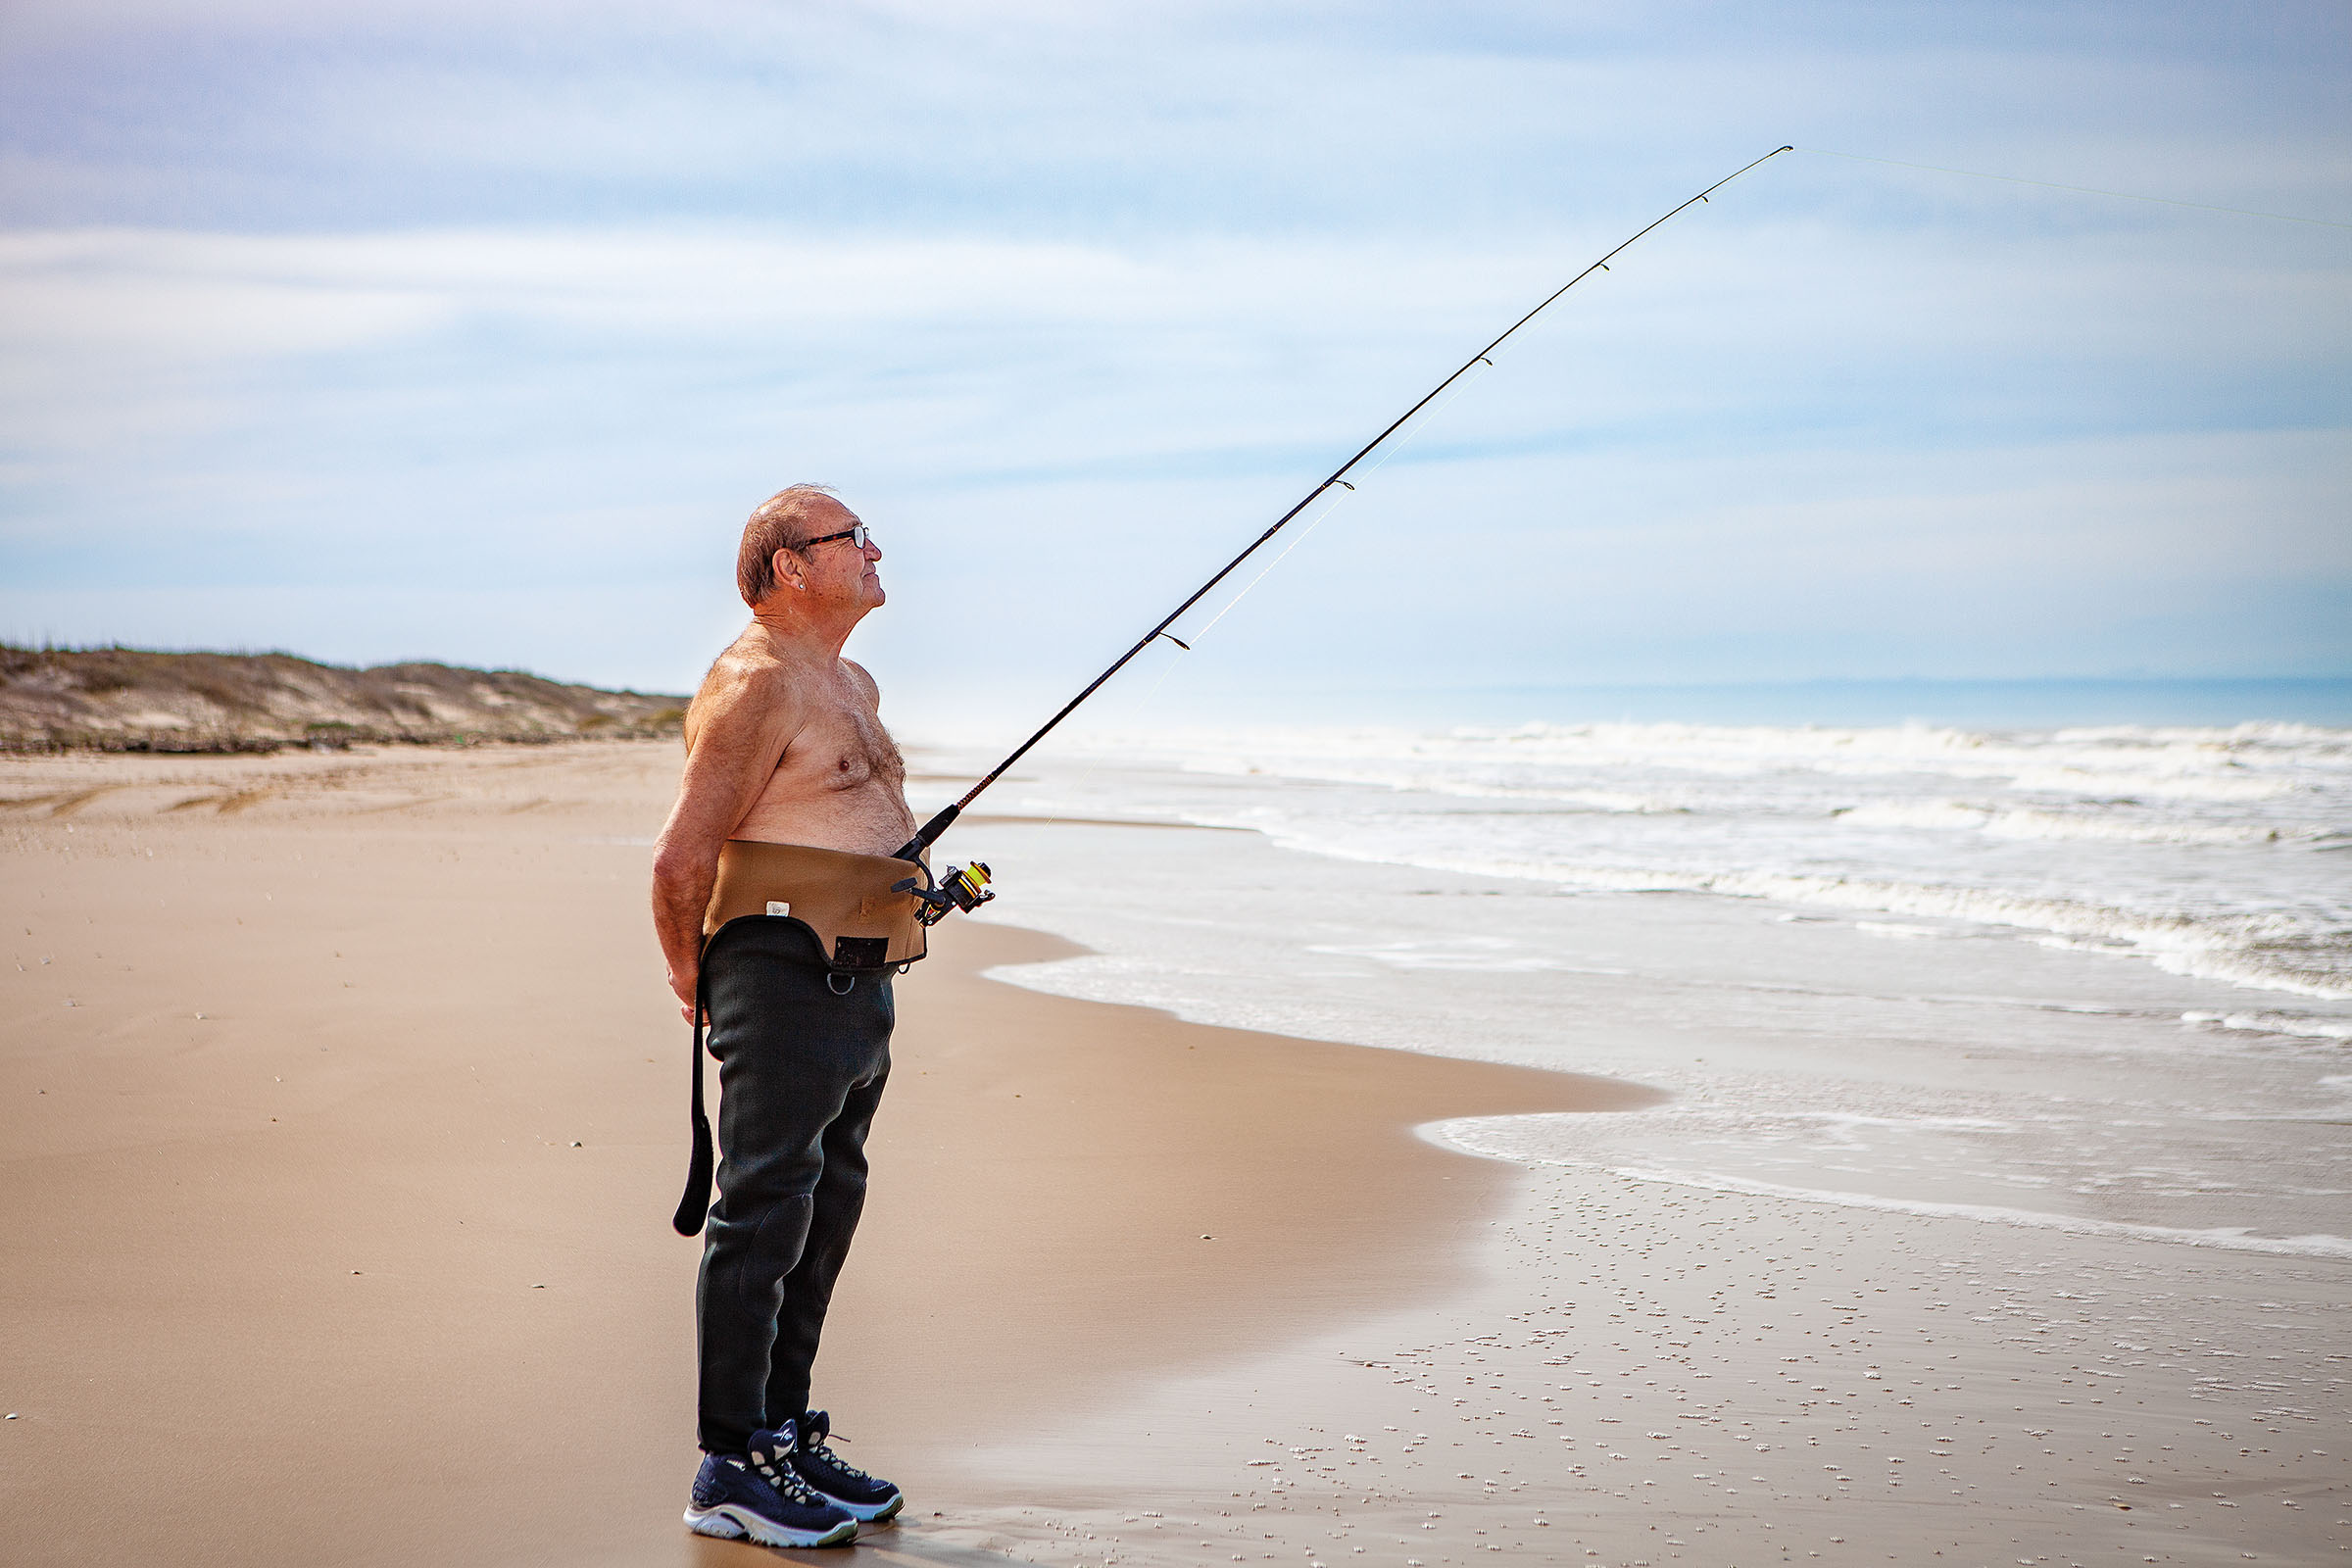 A fisherman finds a new way to hold his rod and reel while drying off on South Padre Island, Texas